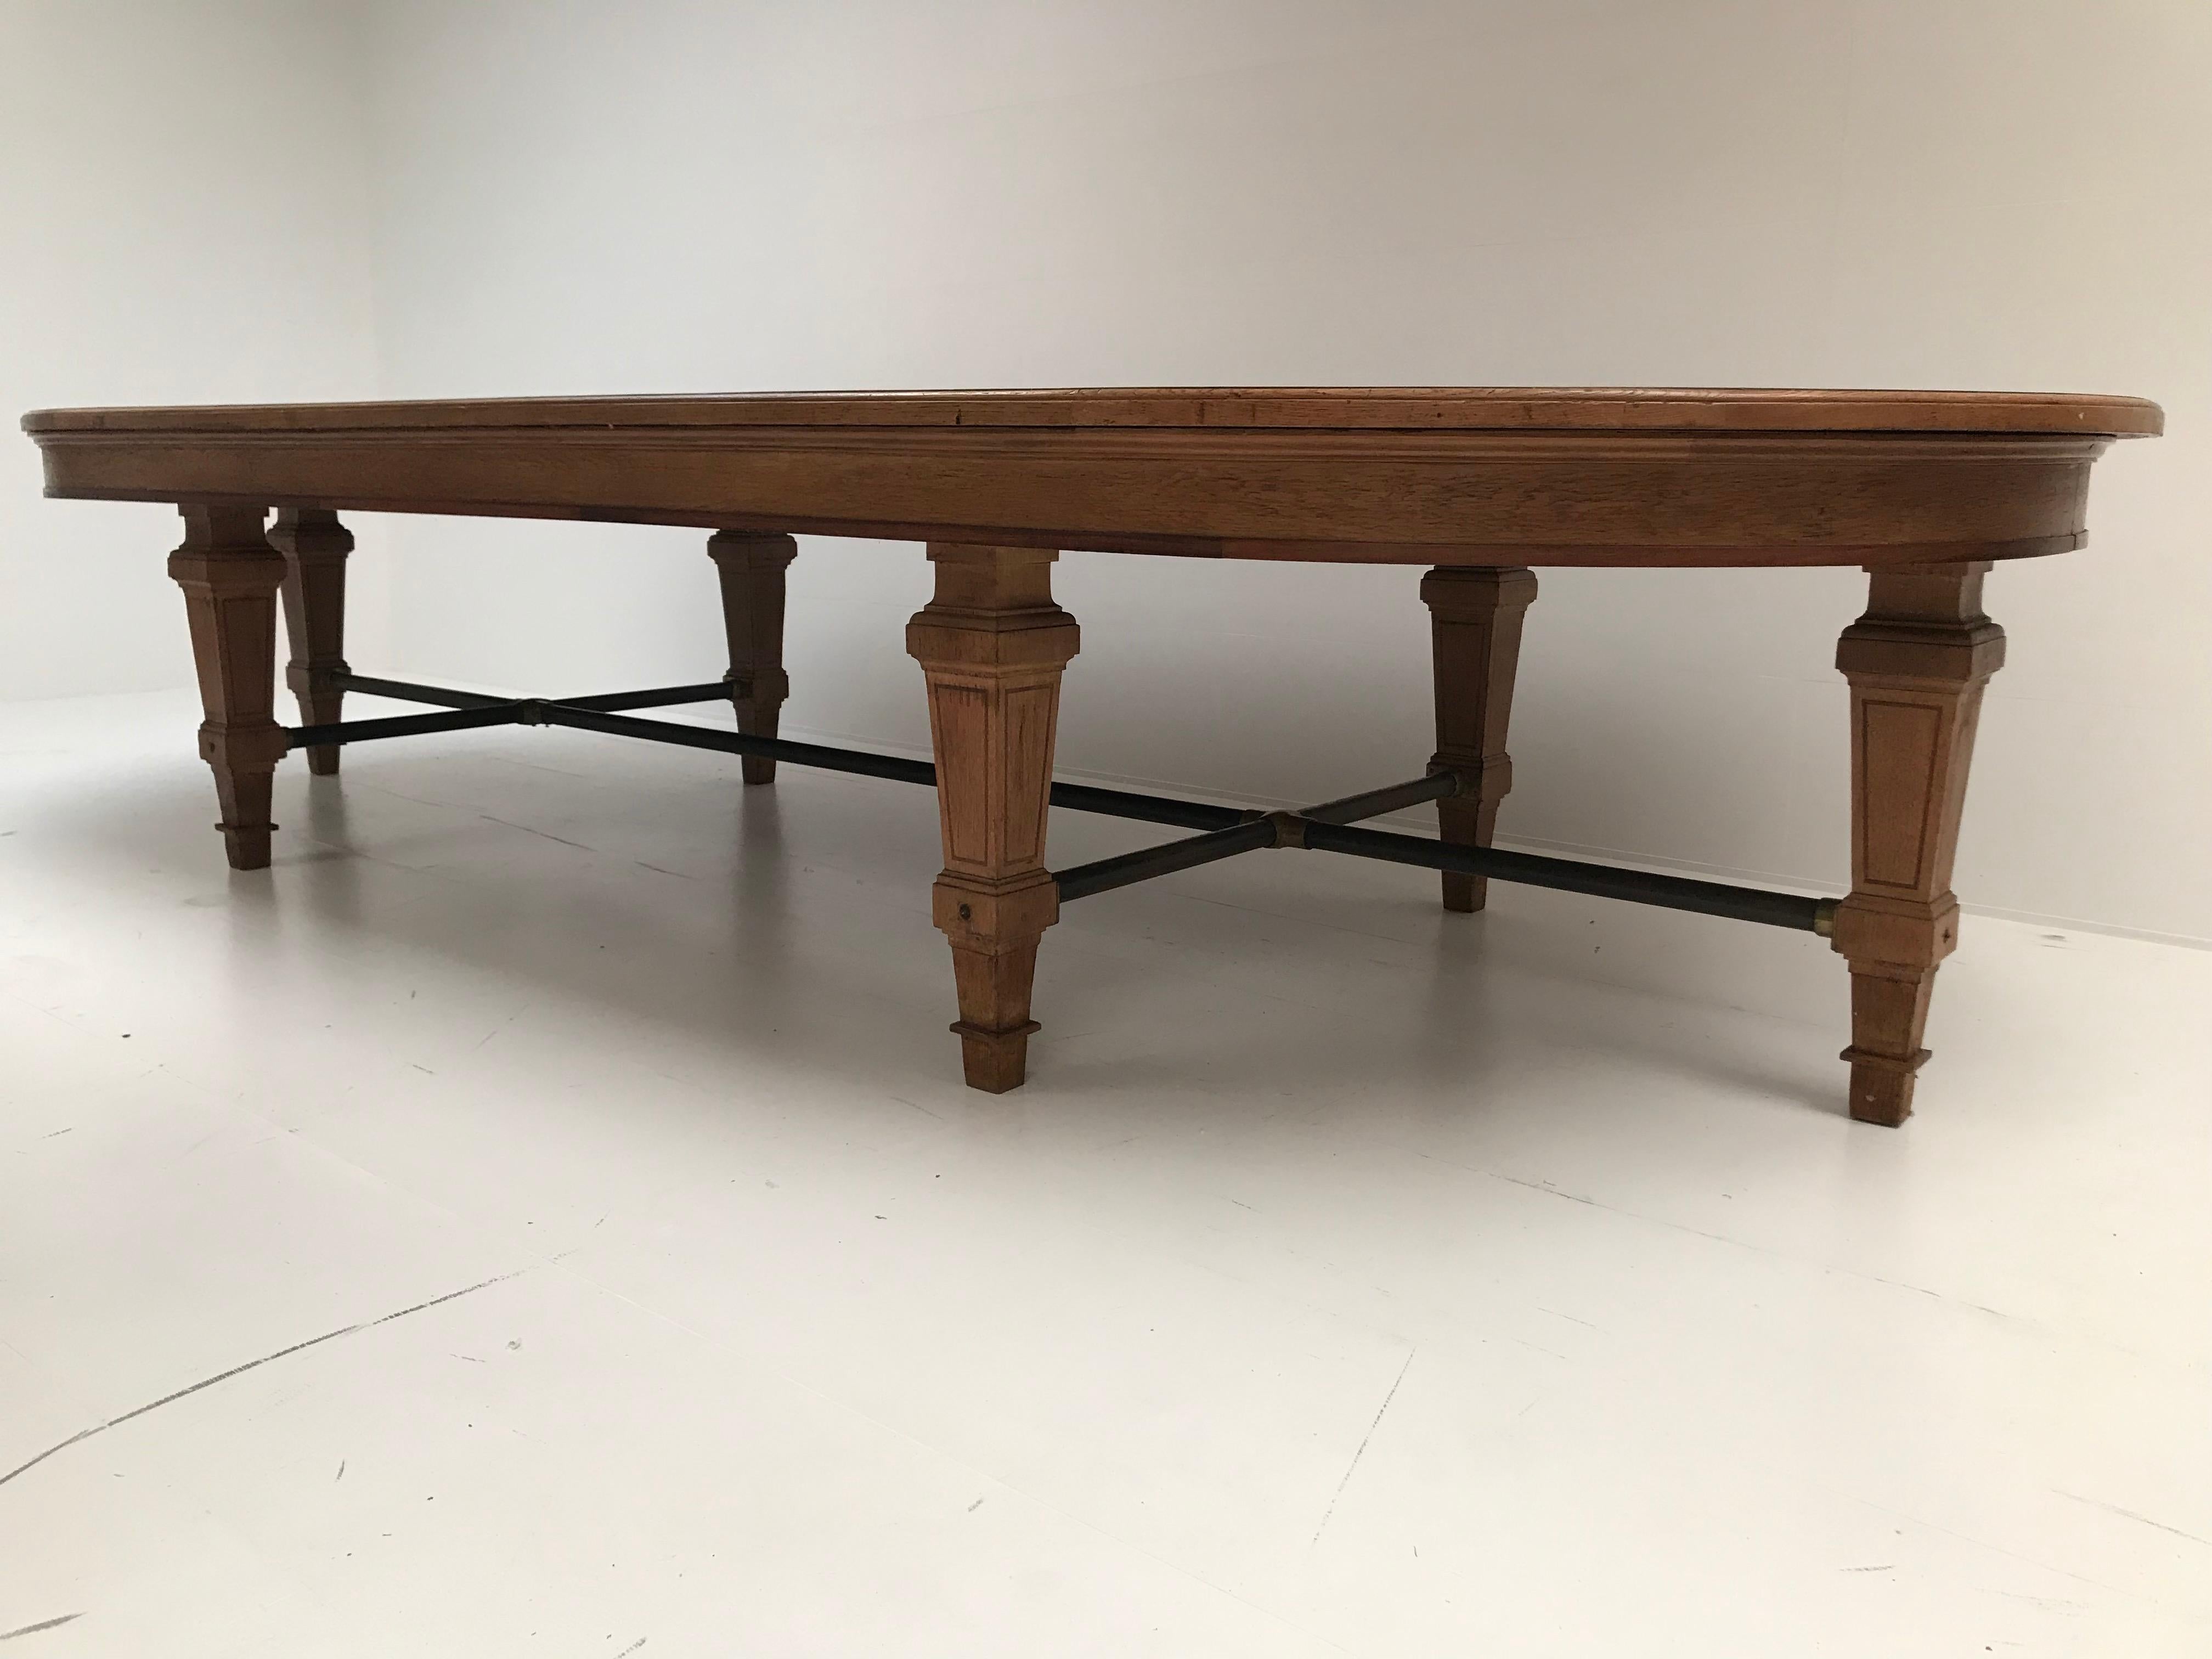 Spectacular Conference Table from La Banque de France a Lille
in high quality oak and with good patinated metal finish
cone shaped legs, large leg space
good original condition.
Impressive size 4 meter by 1.60 meter large.